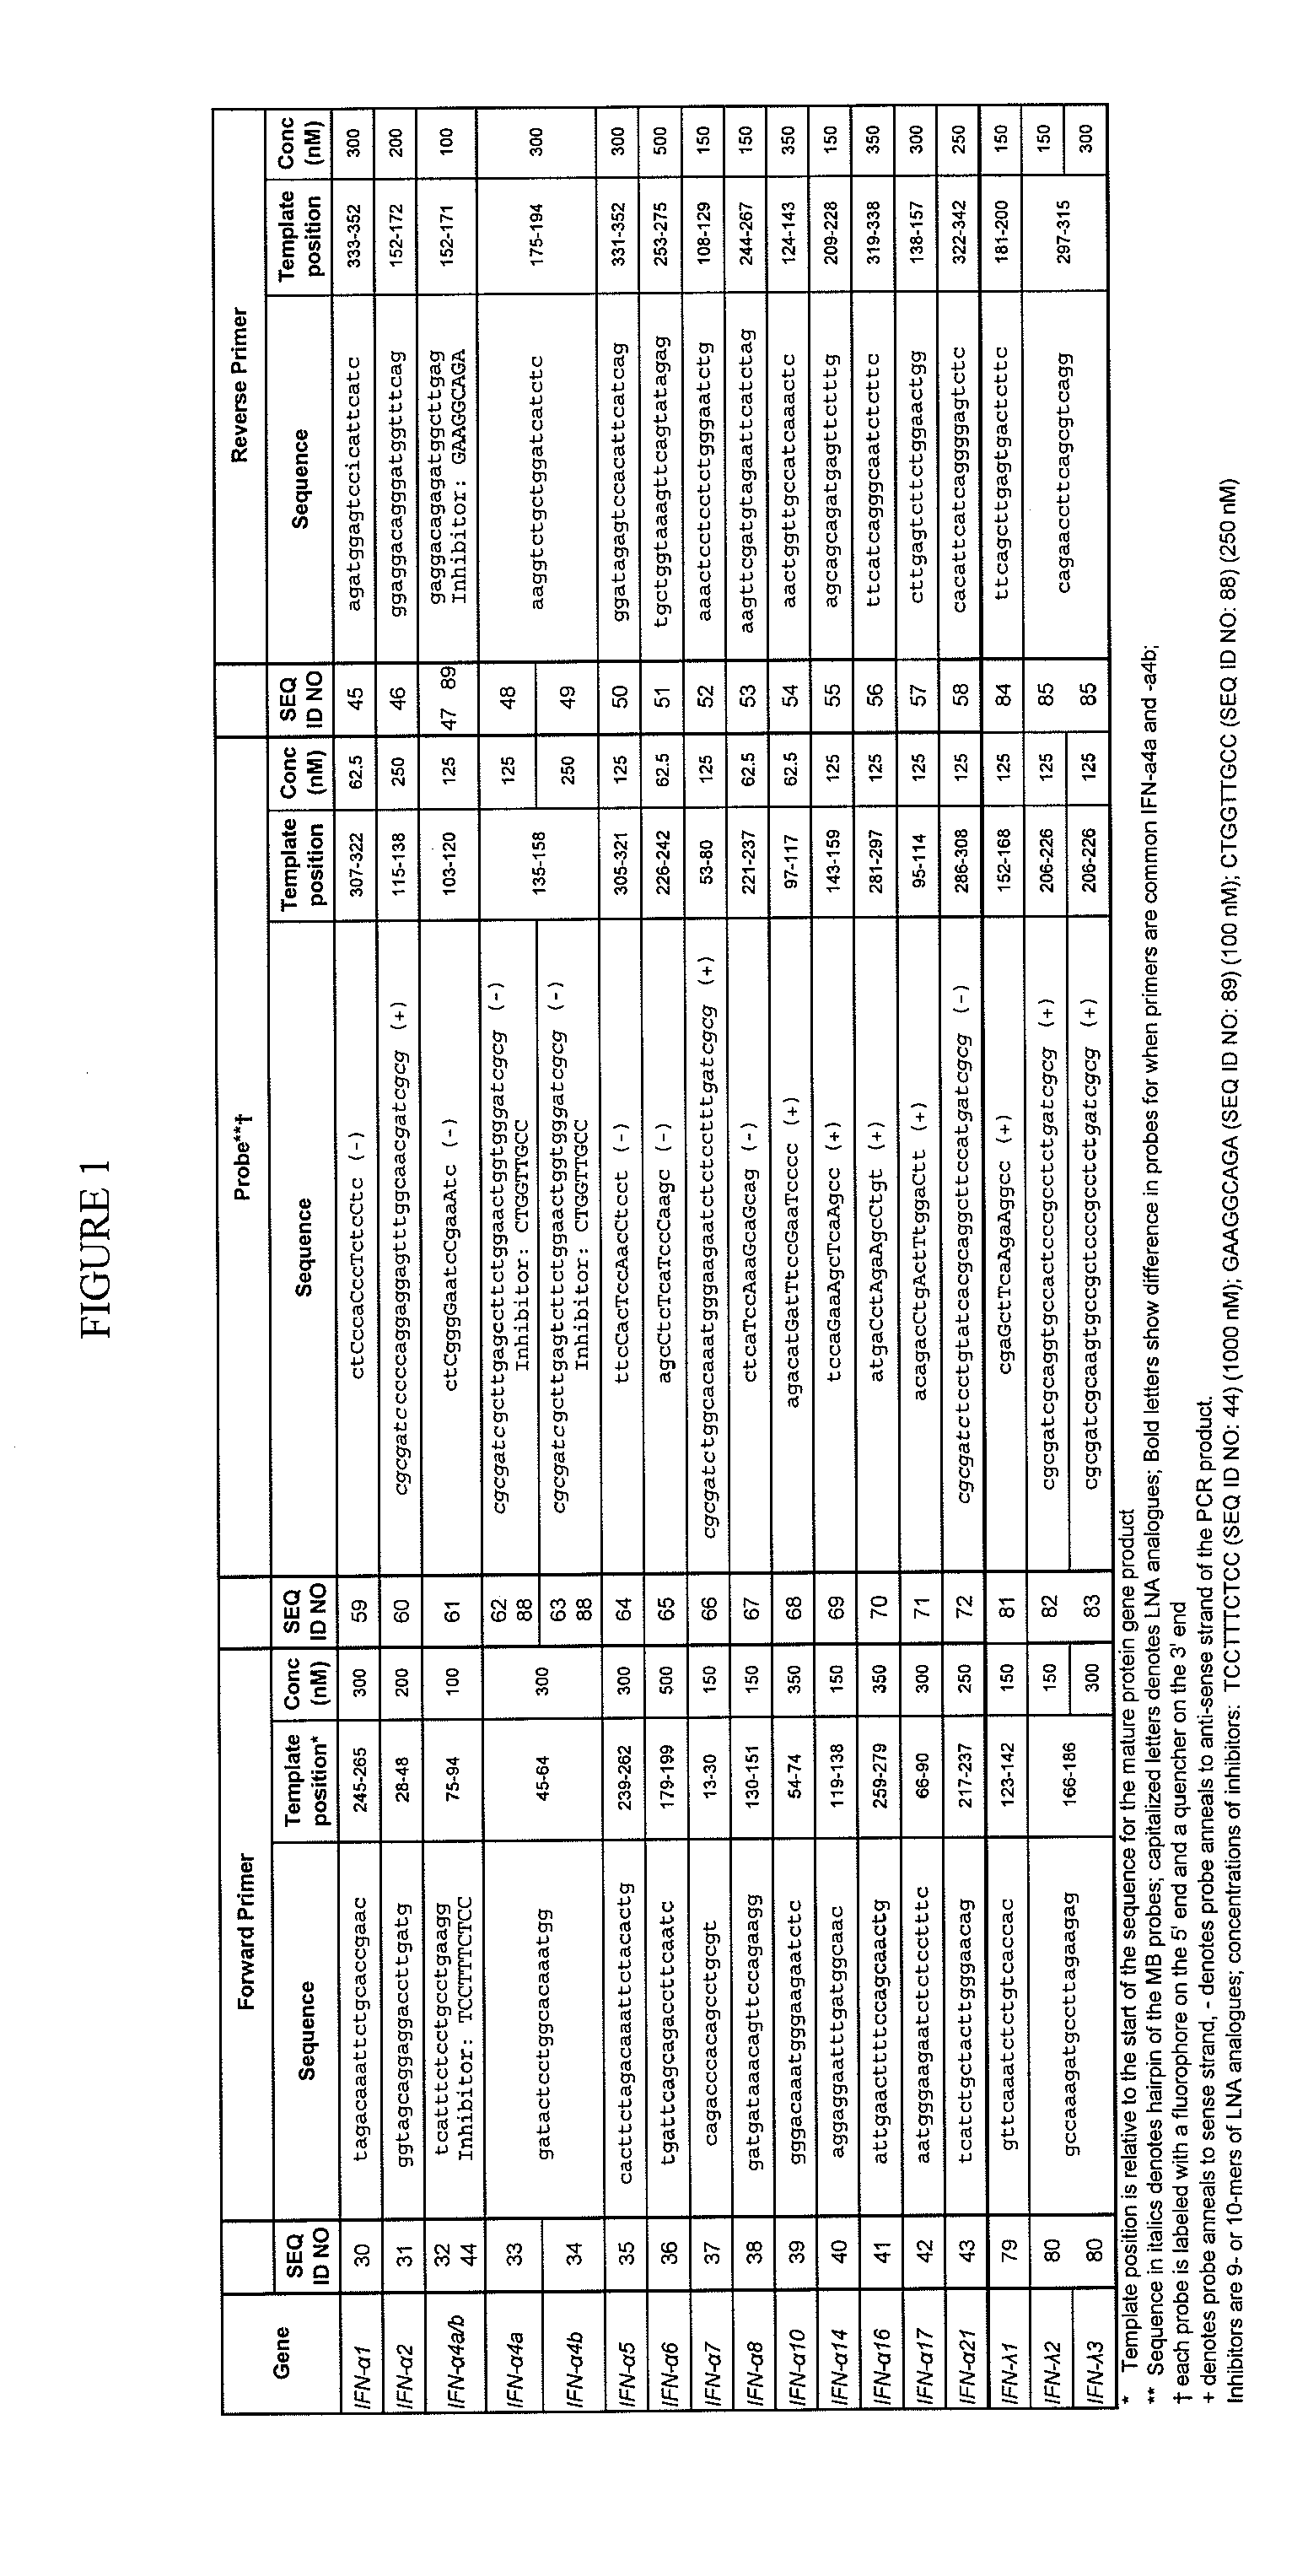 Compositions for detecting human interferon-alpha subtypes and methods of use